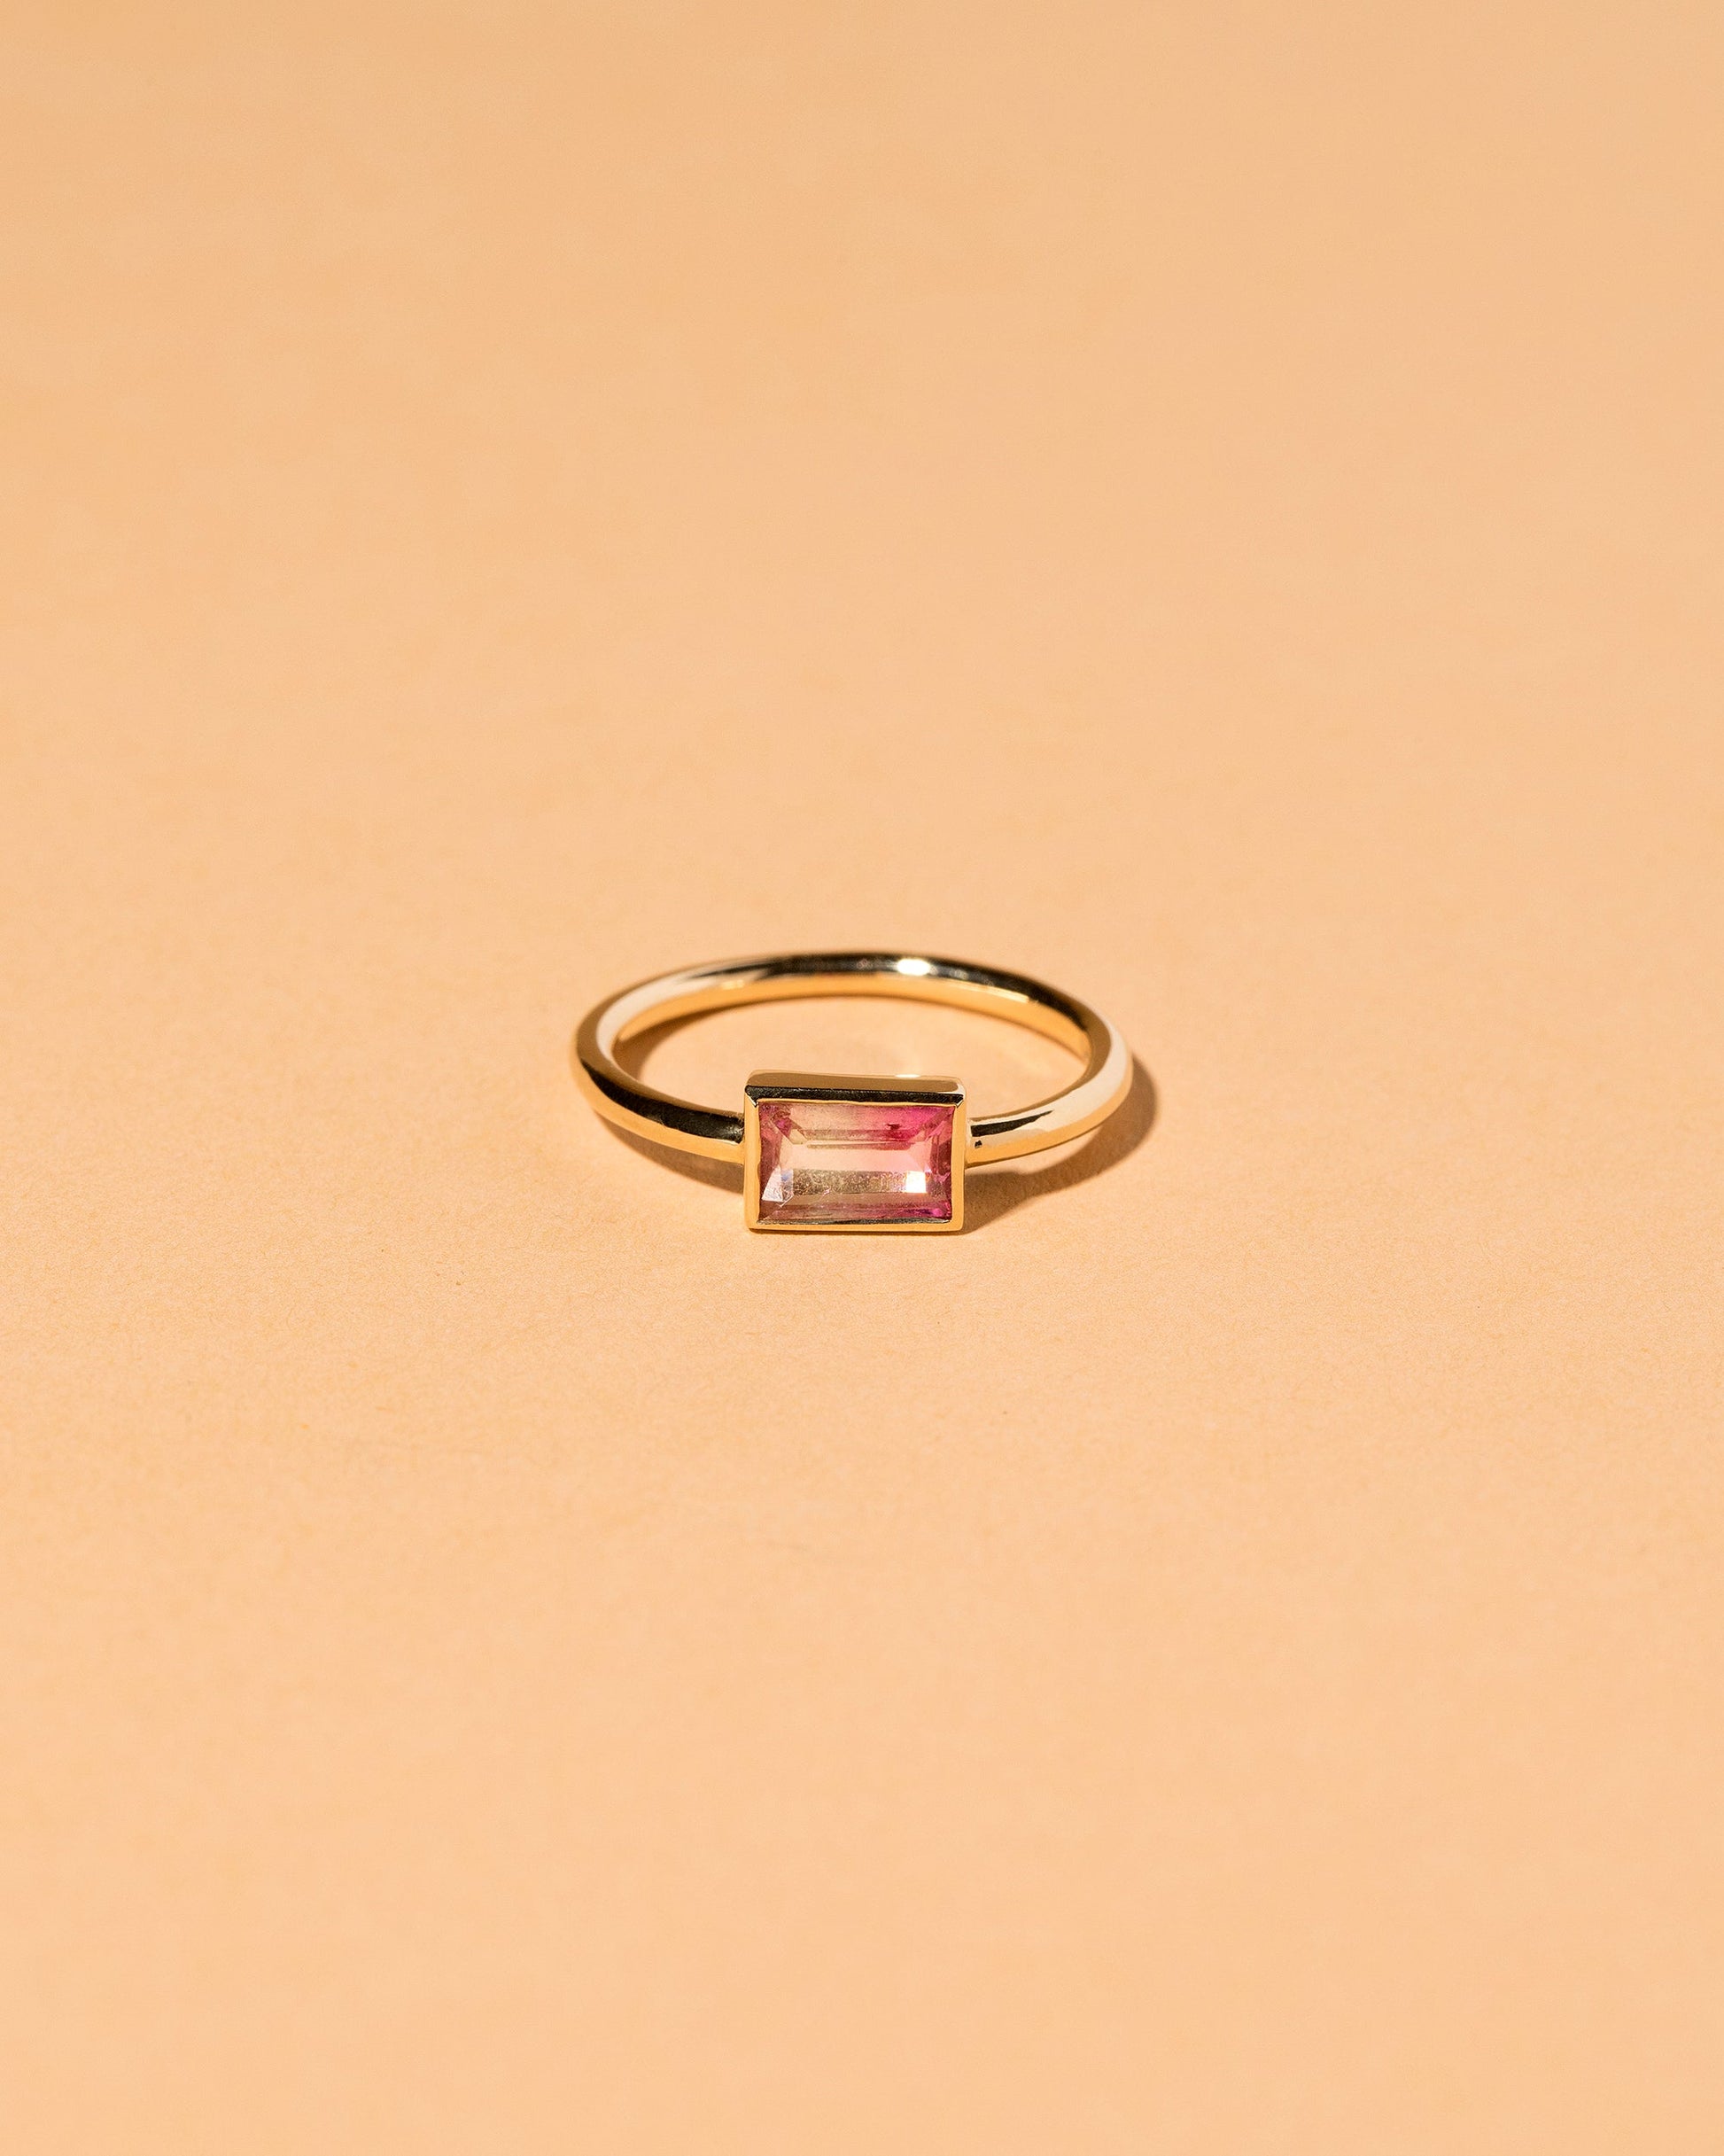  Pink & White Tourmaline Ring on light color background.